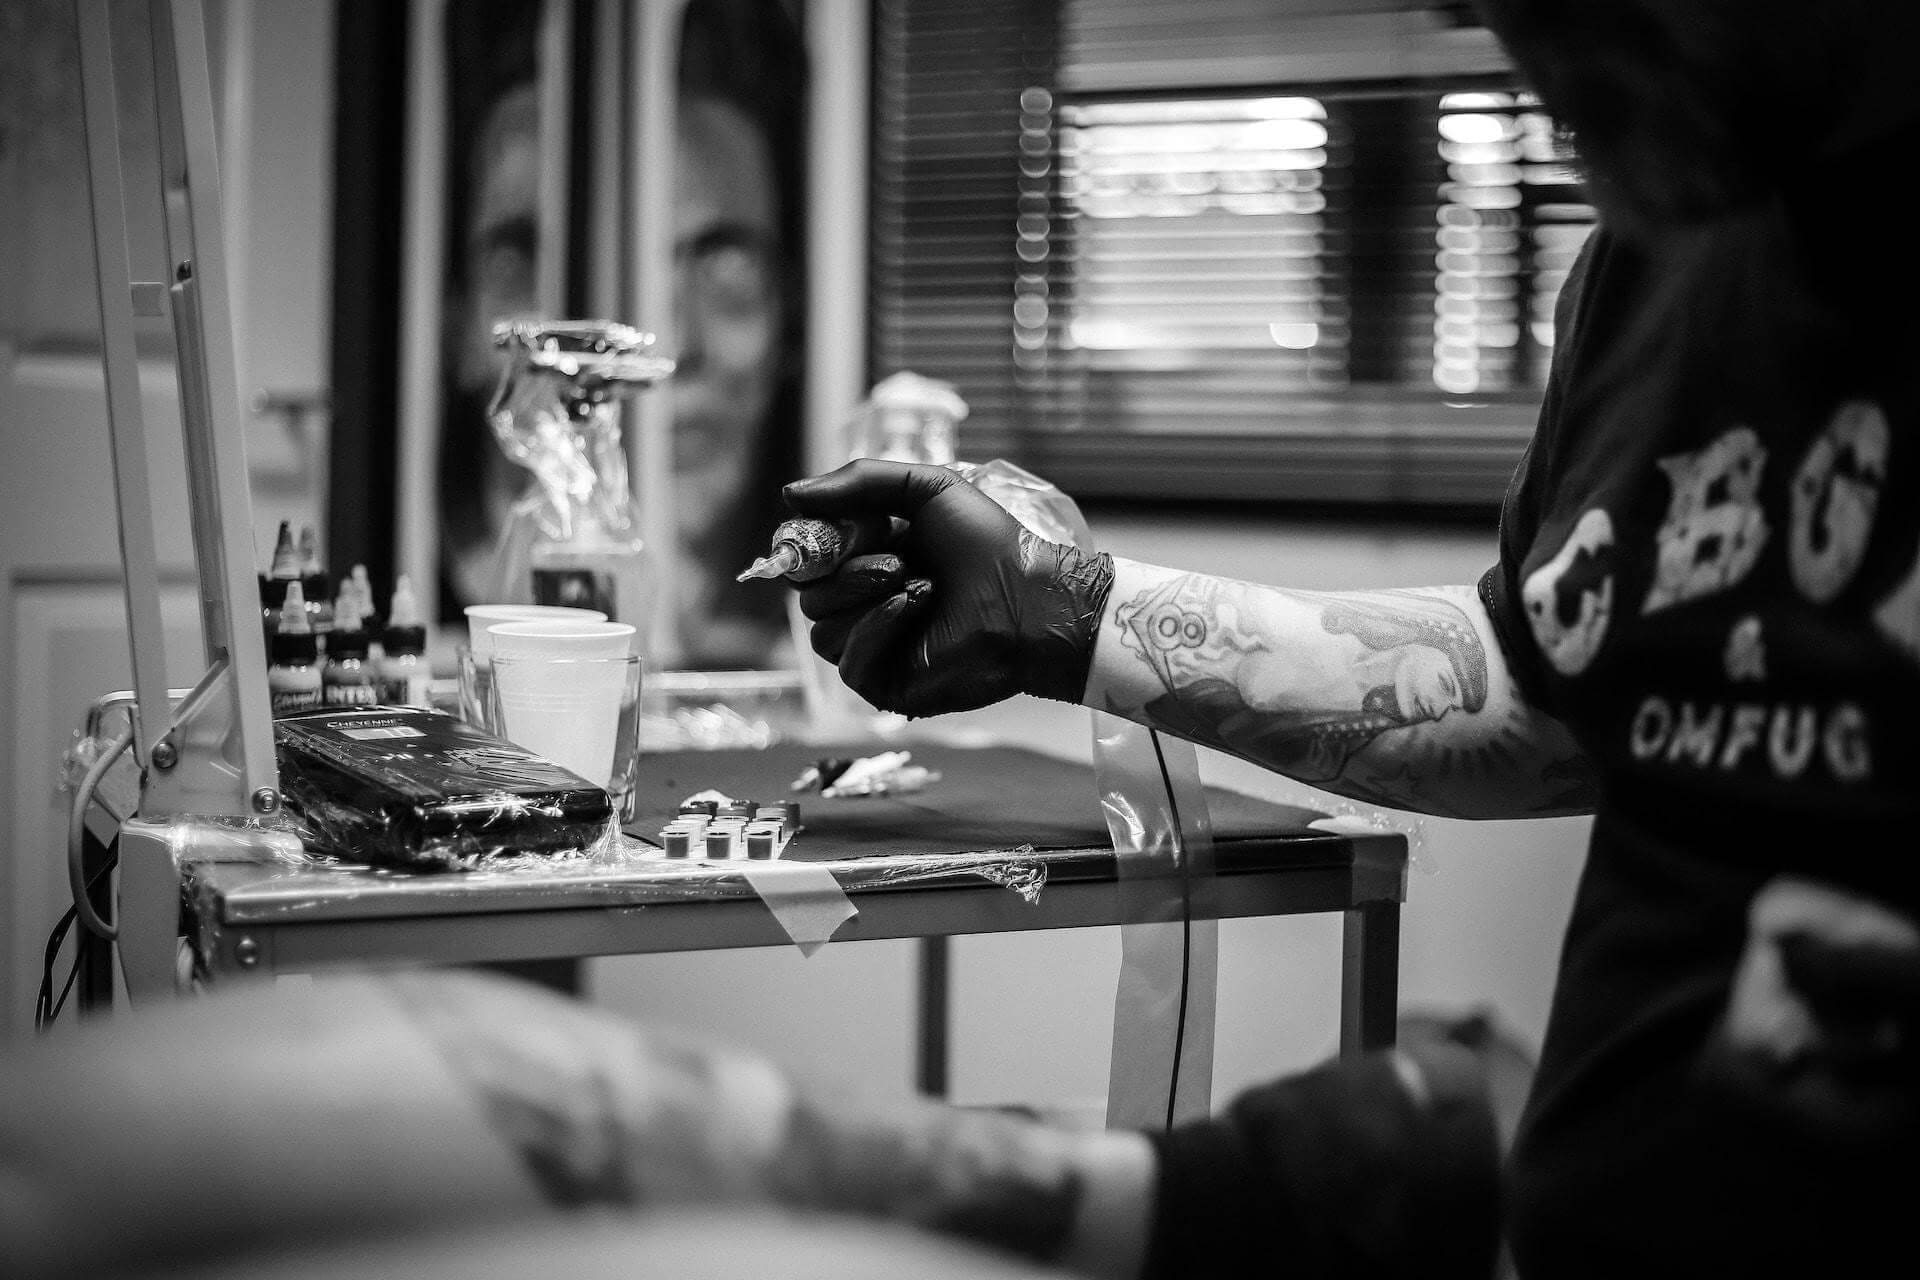 An Overview of the History of Tattoos